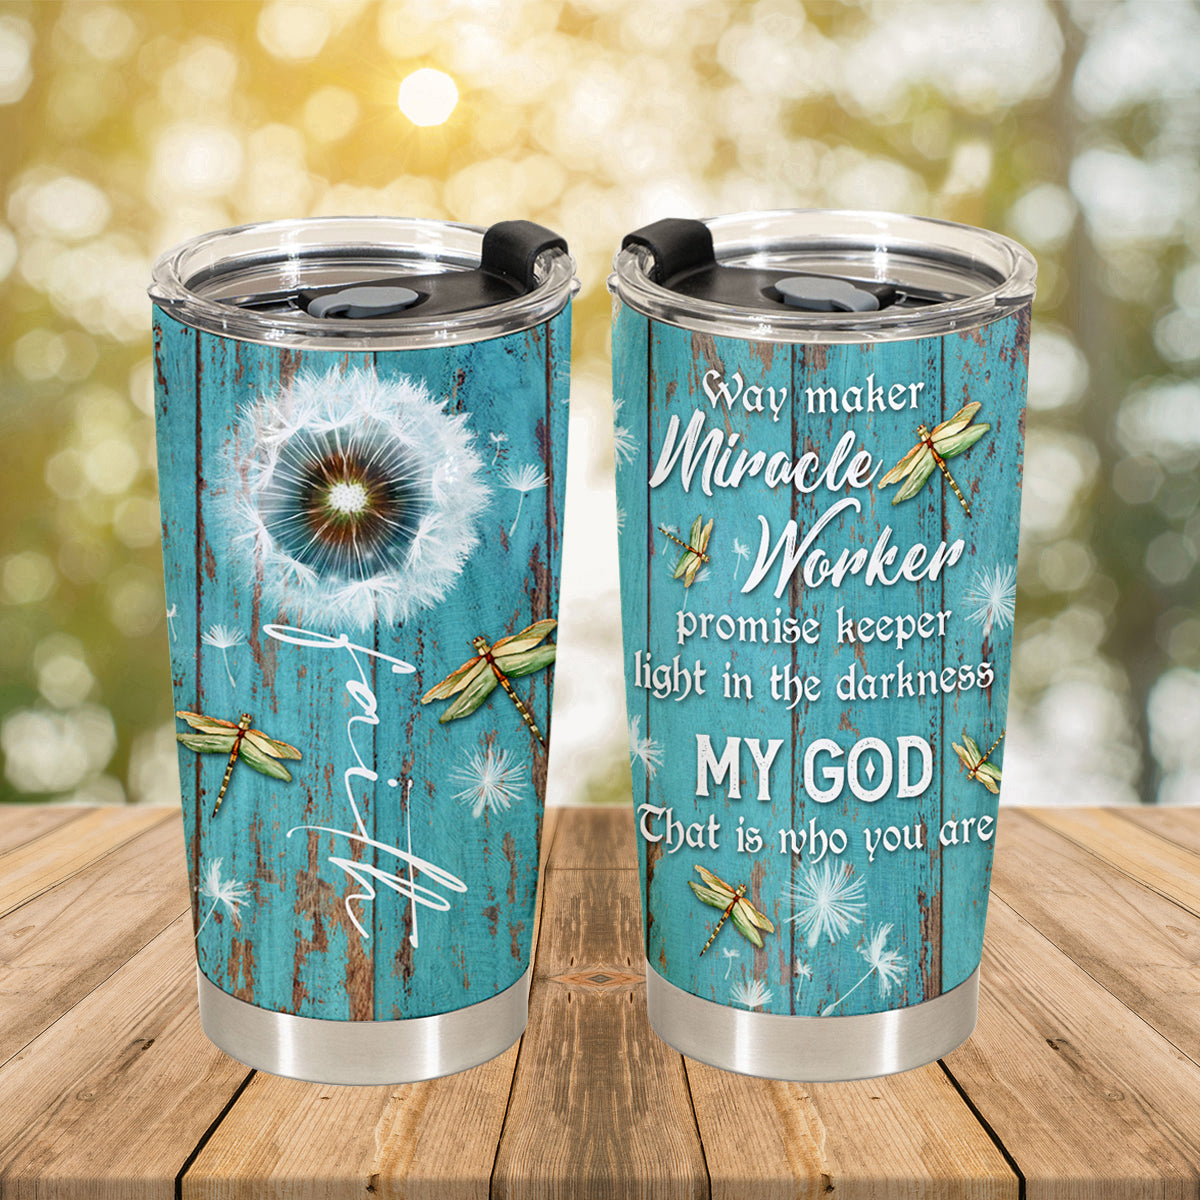 Best Custom Dragonfly Gift for Women - Boho Gifts for Women With Positive Inspirational Quote - Motivational, Religious, Spiritual, Inspirational 20oz Stainless Steel Tumbler Gifts for Women + 1666690036380.jpg